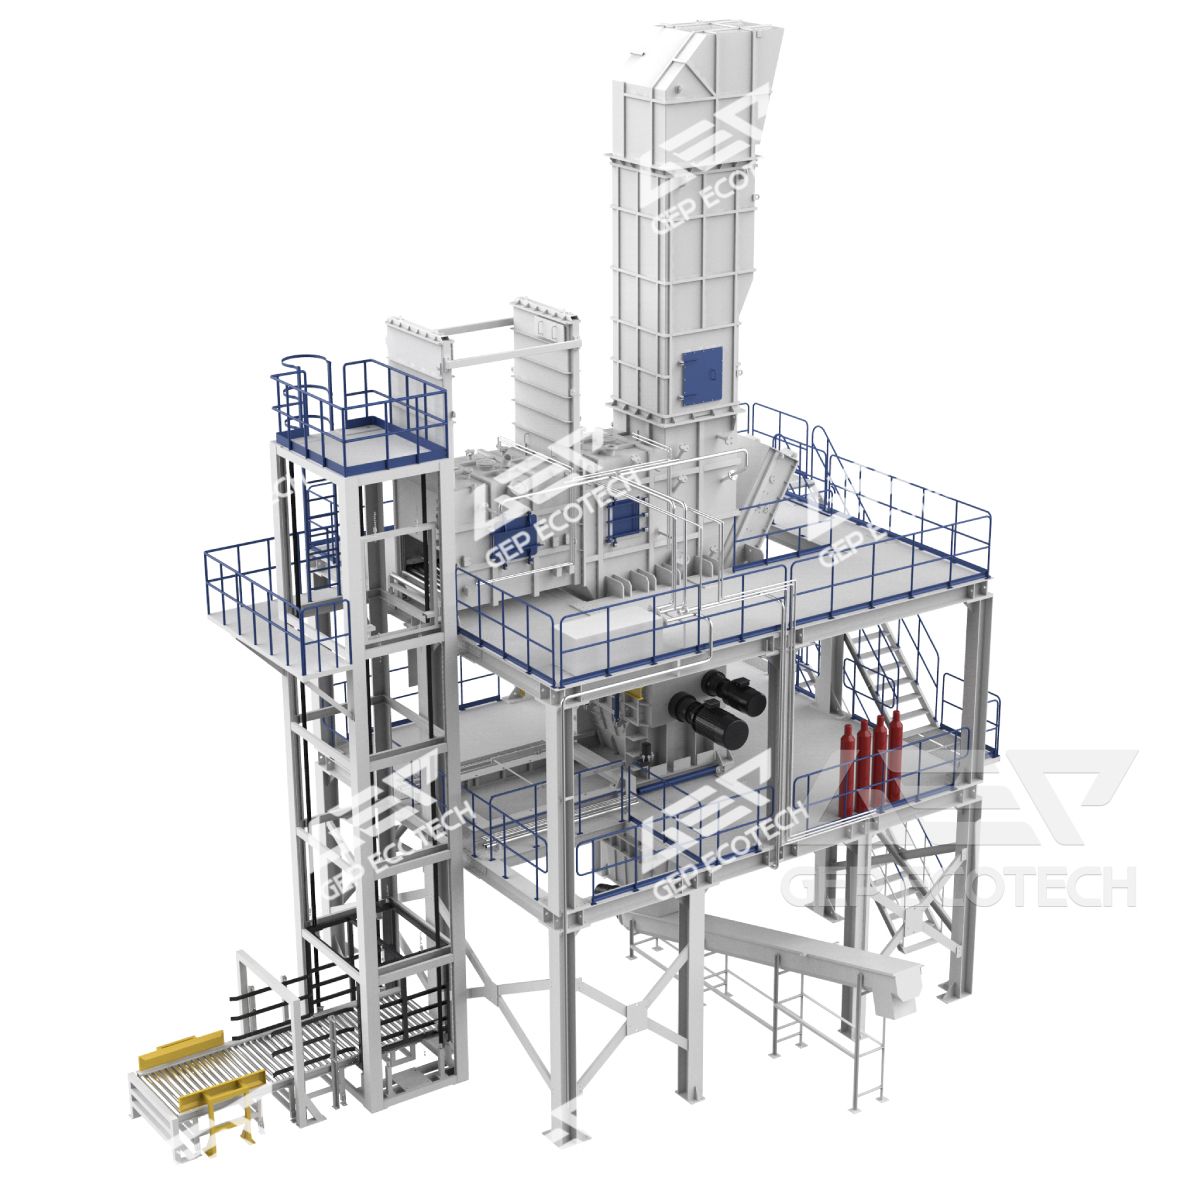 Intelligent Tower Type Hazardous Waste Shredding System: Time for a Re-Introduction